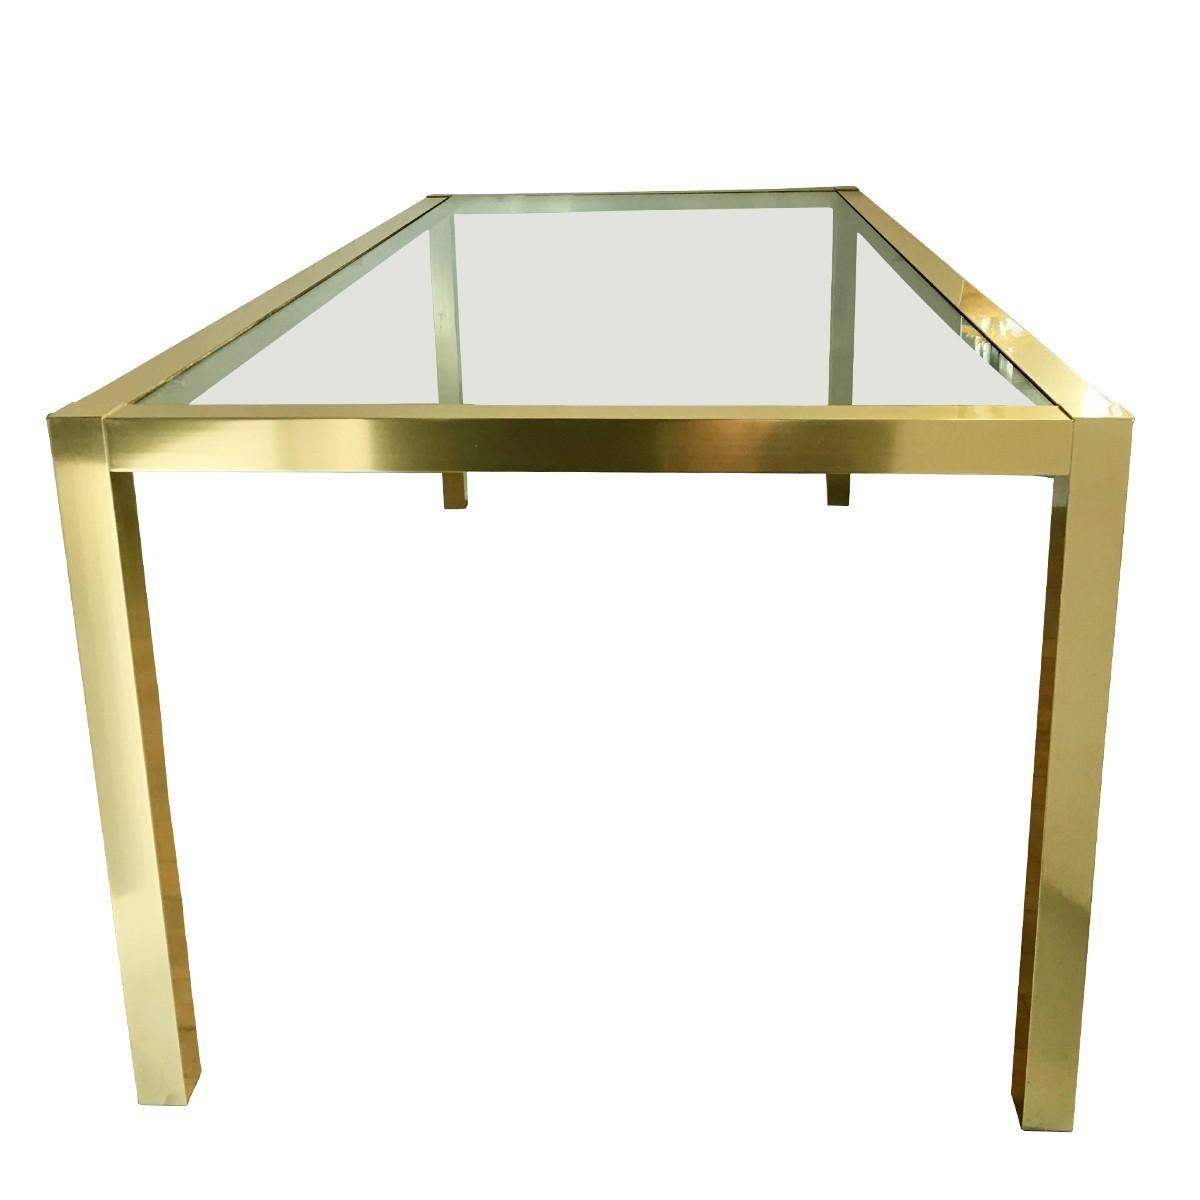 Large Mid-Century Modern brass-plated gold tone metal and glass parsons style dining table. This long rectangular shaped parsons style table features square legs and a thick removable clear glass top. Would also make a great over sized desk. In the